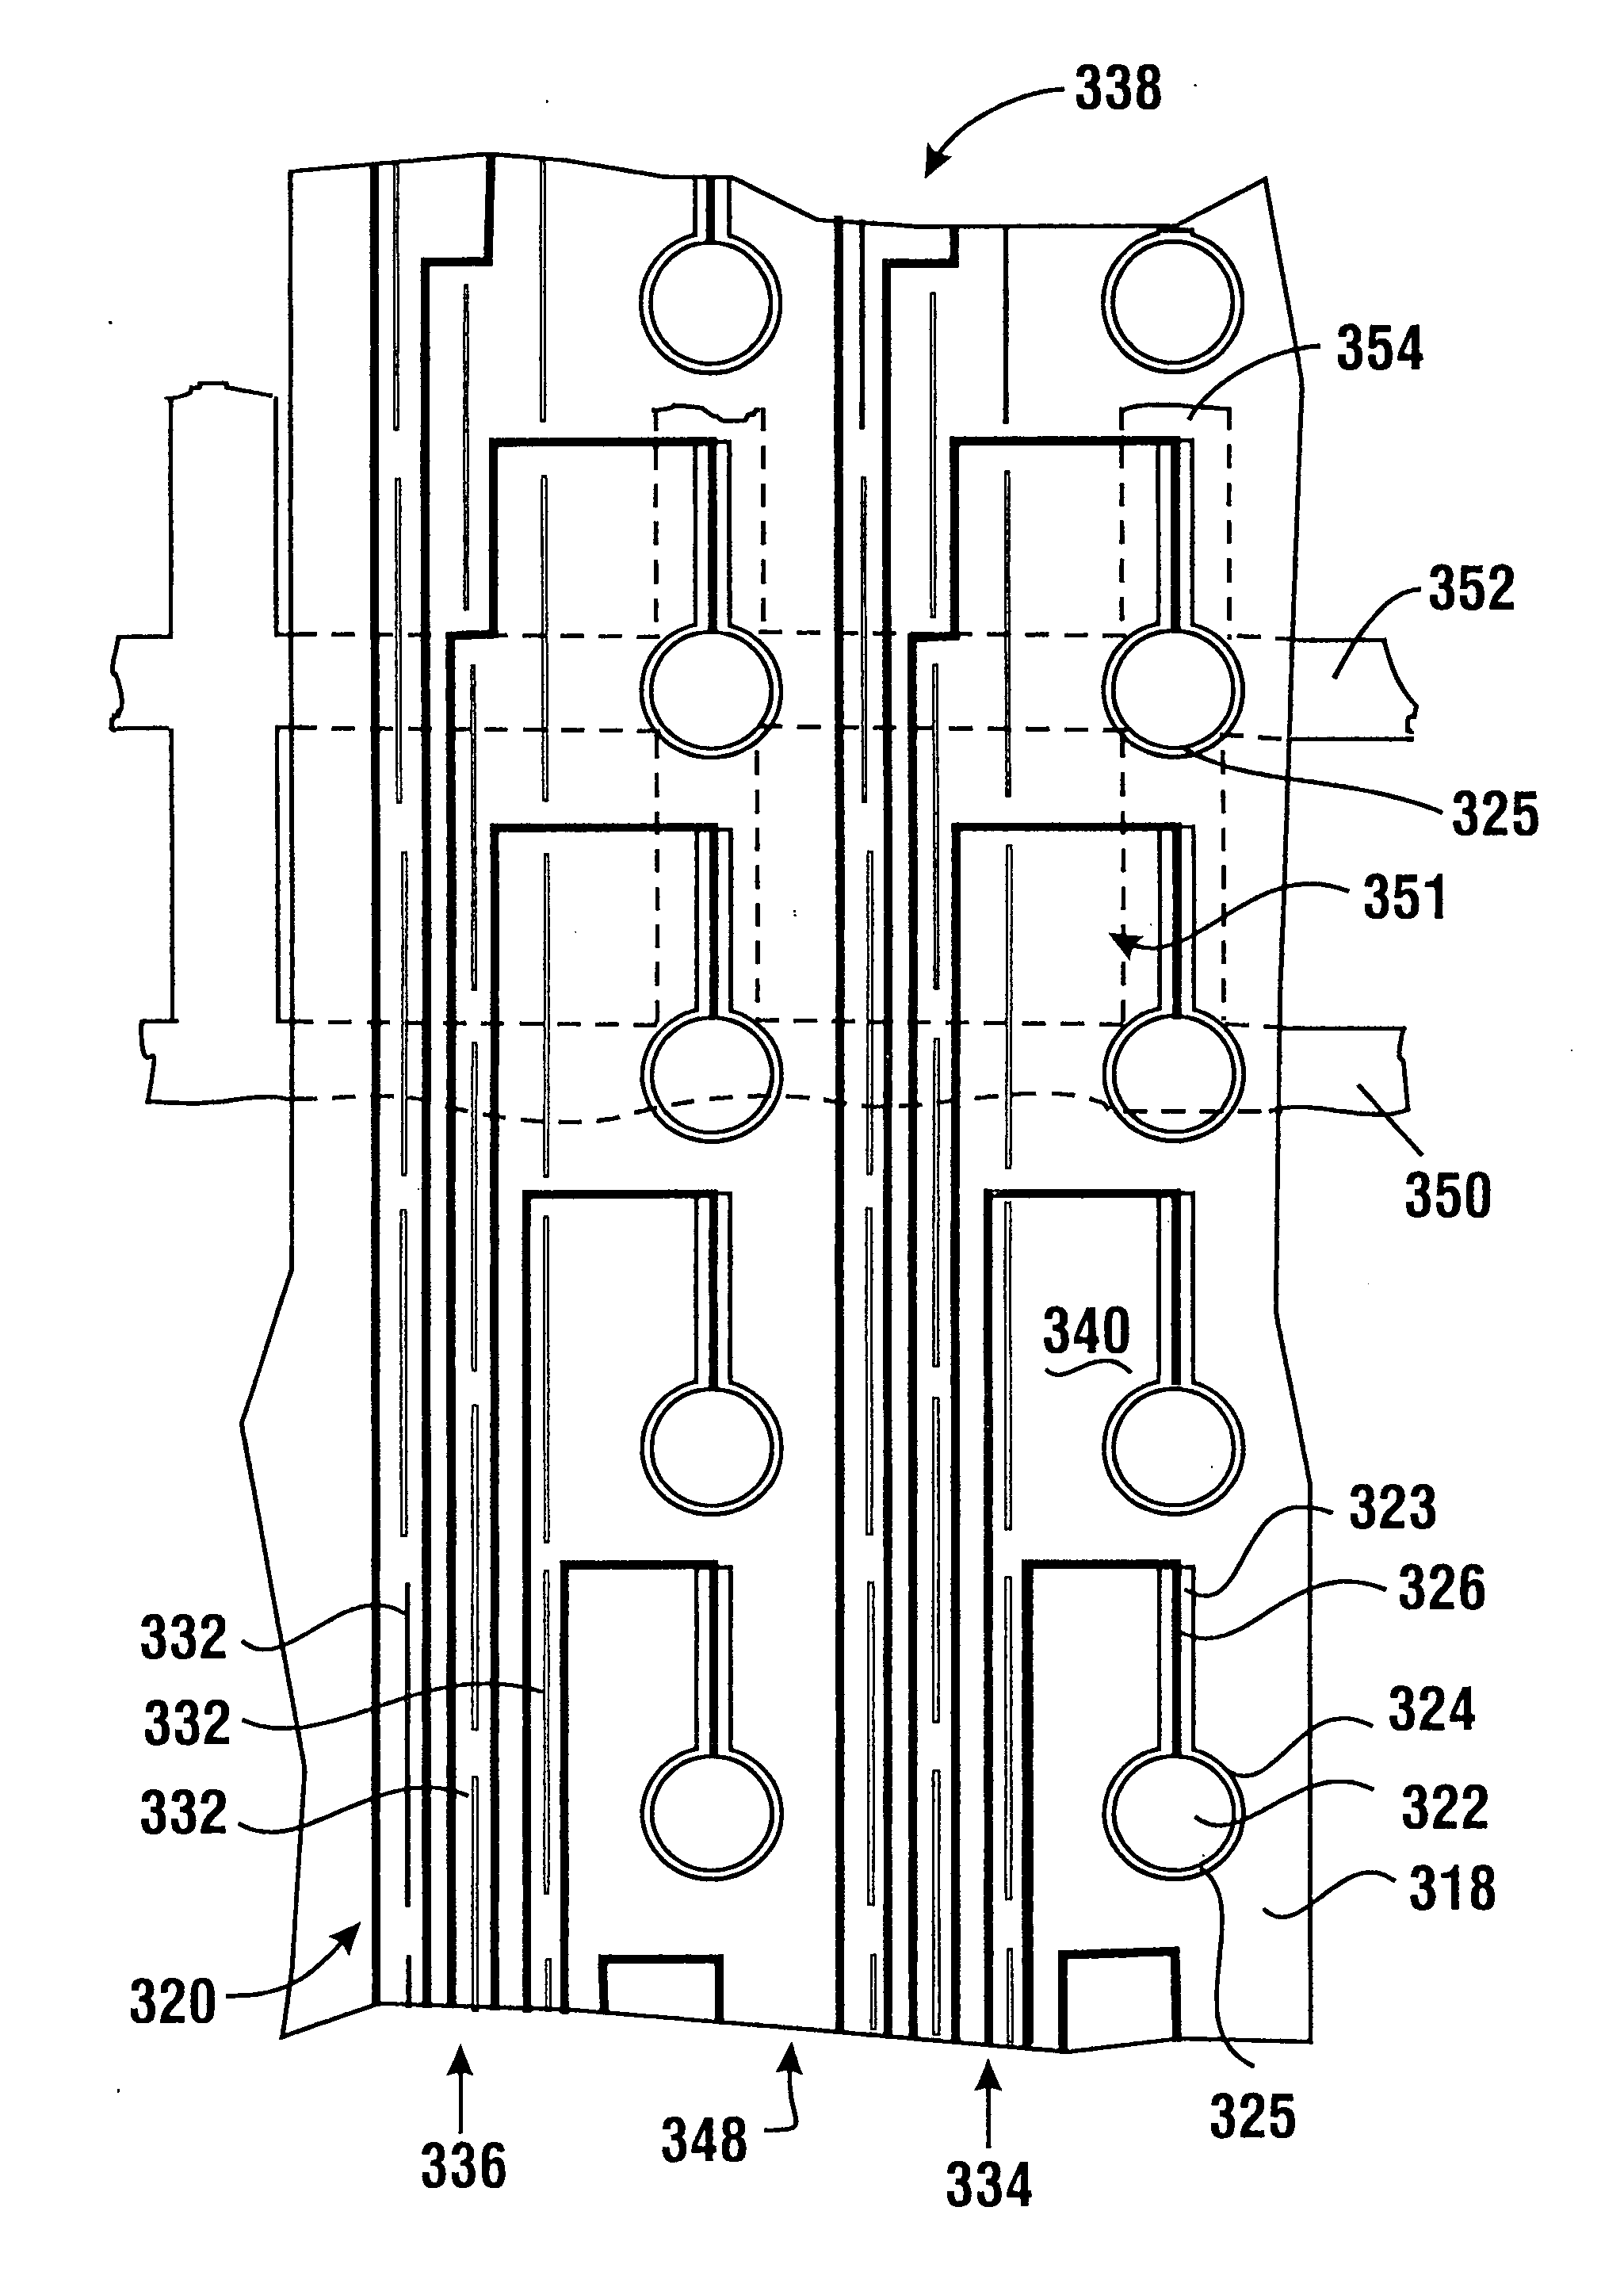 EMG electrode apparatus and positioning system